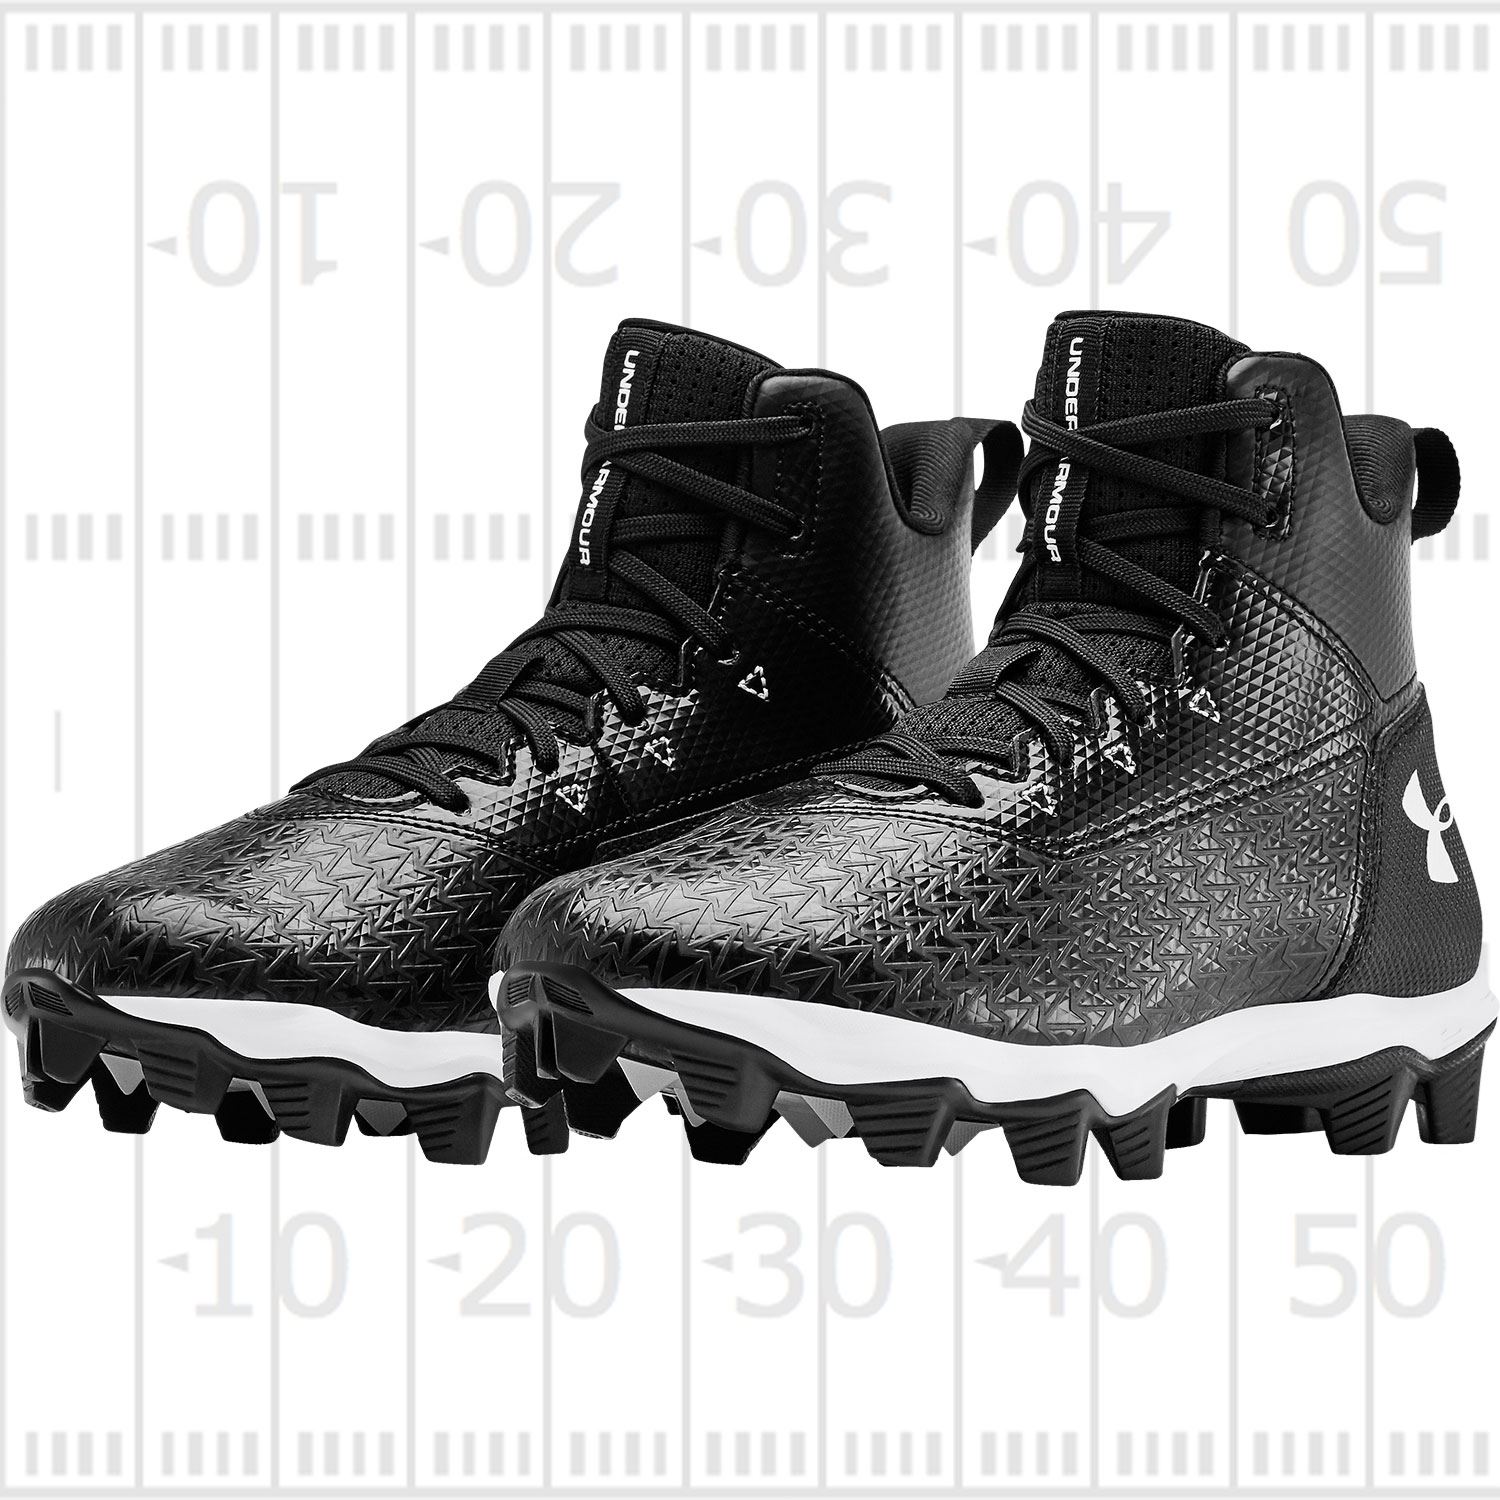 Under Armour UA Hammer Mid RM Jr Youth Cleats Black Size 2y for sale online 